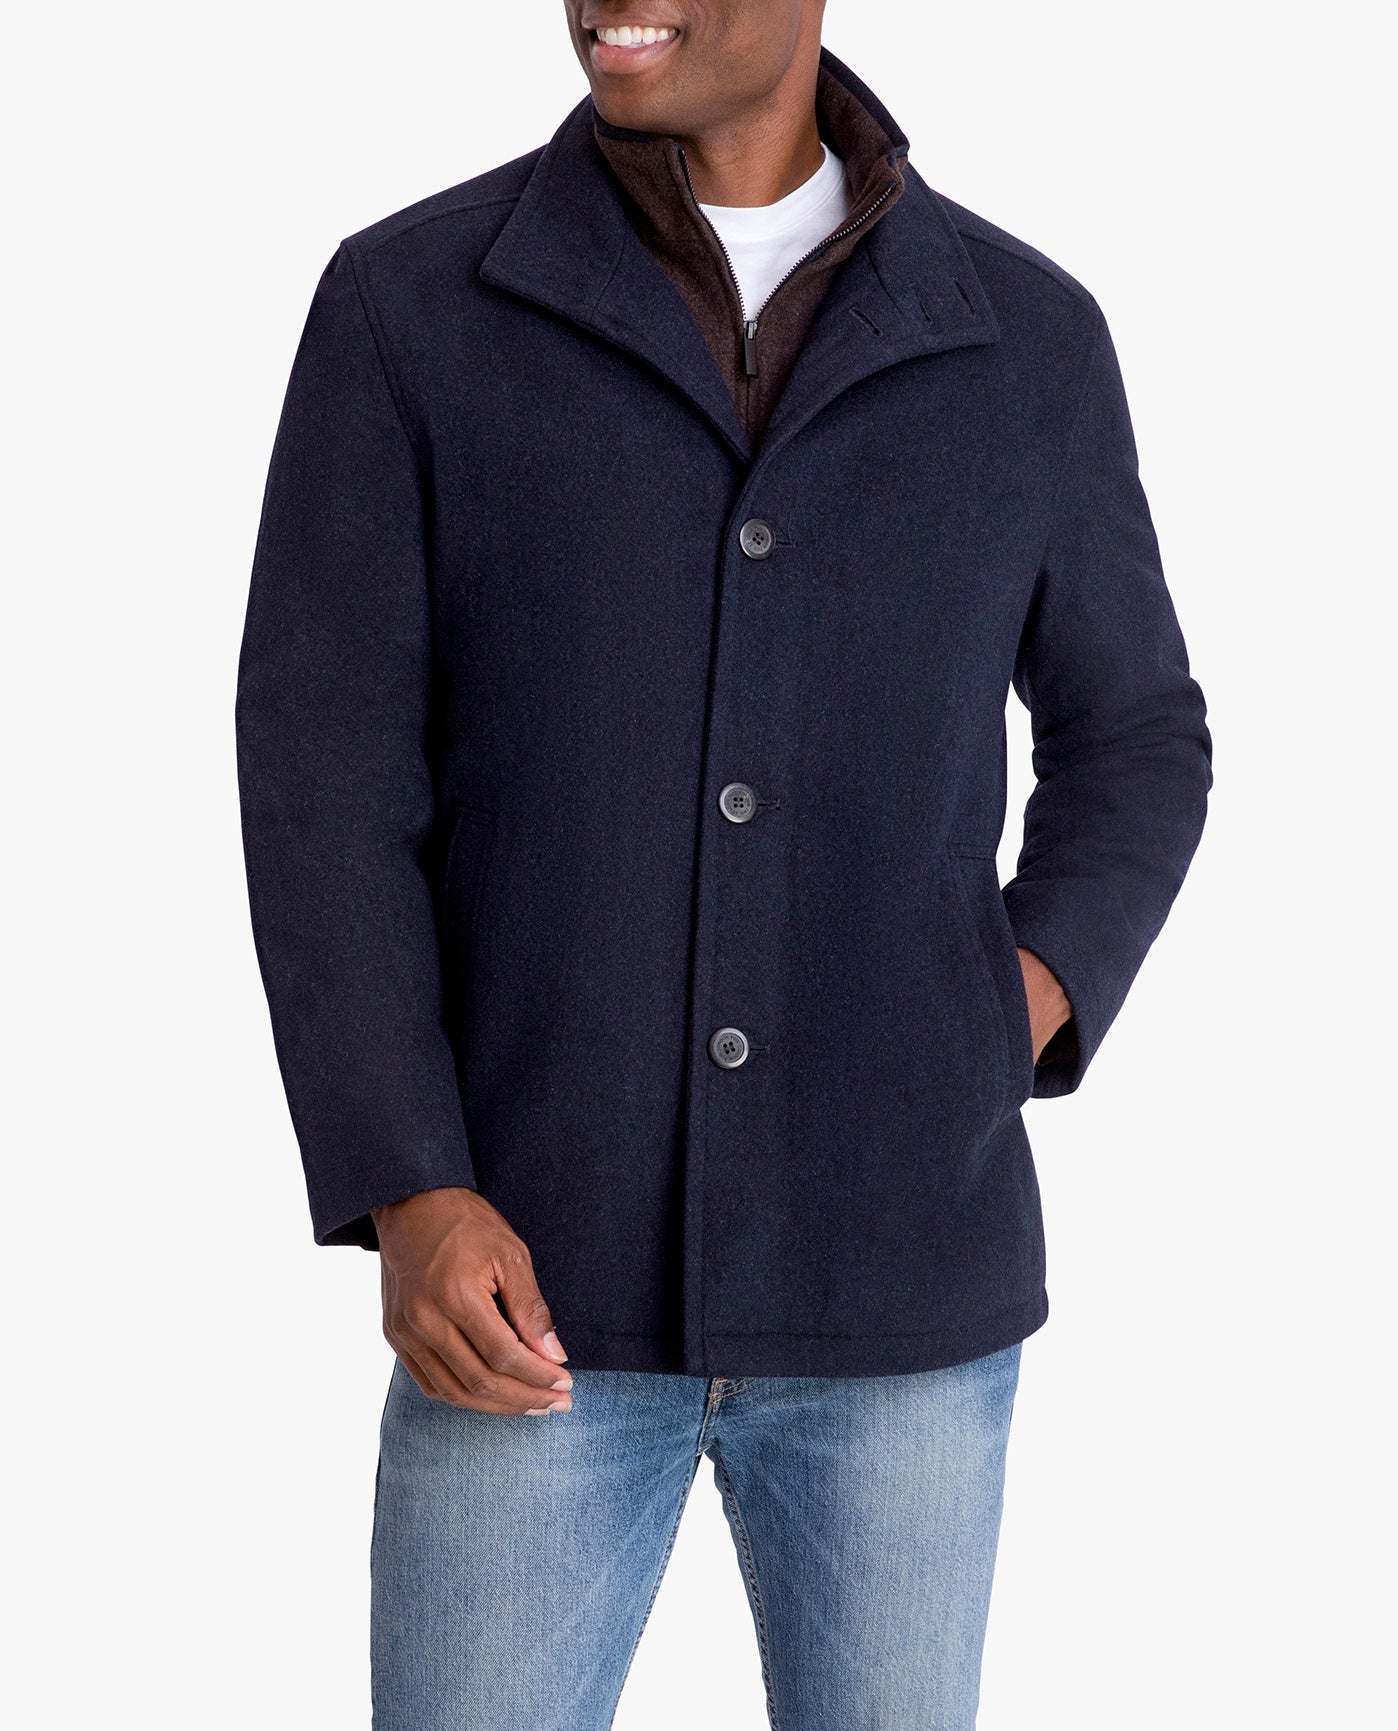 SIDE VIEW OF AMHERST BUTTON FRONT WOOL JACKET | NAVY HEATHER